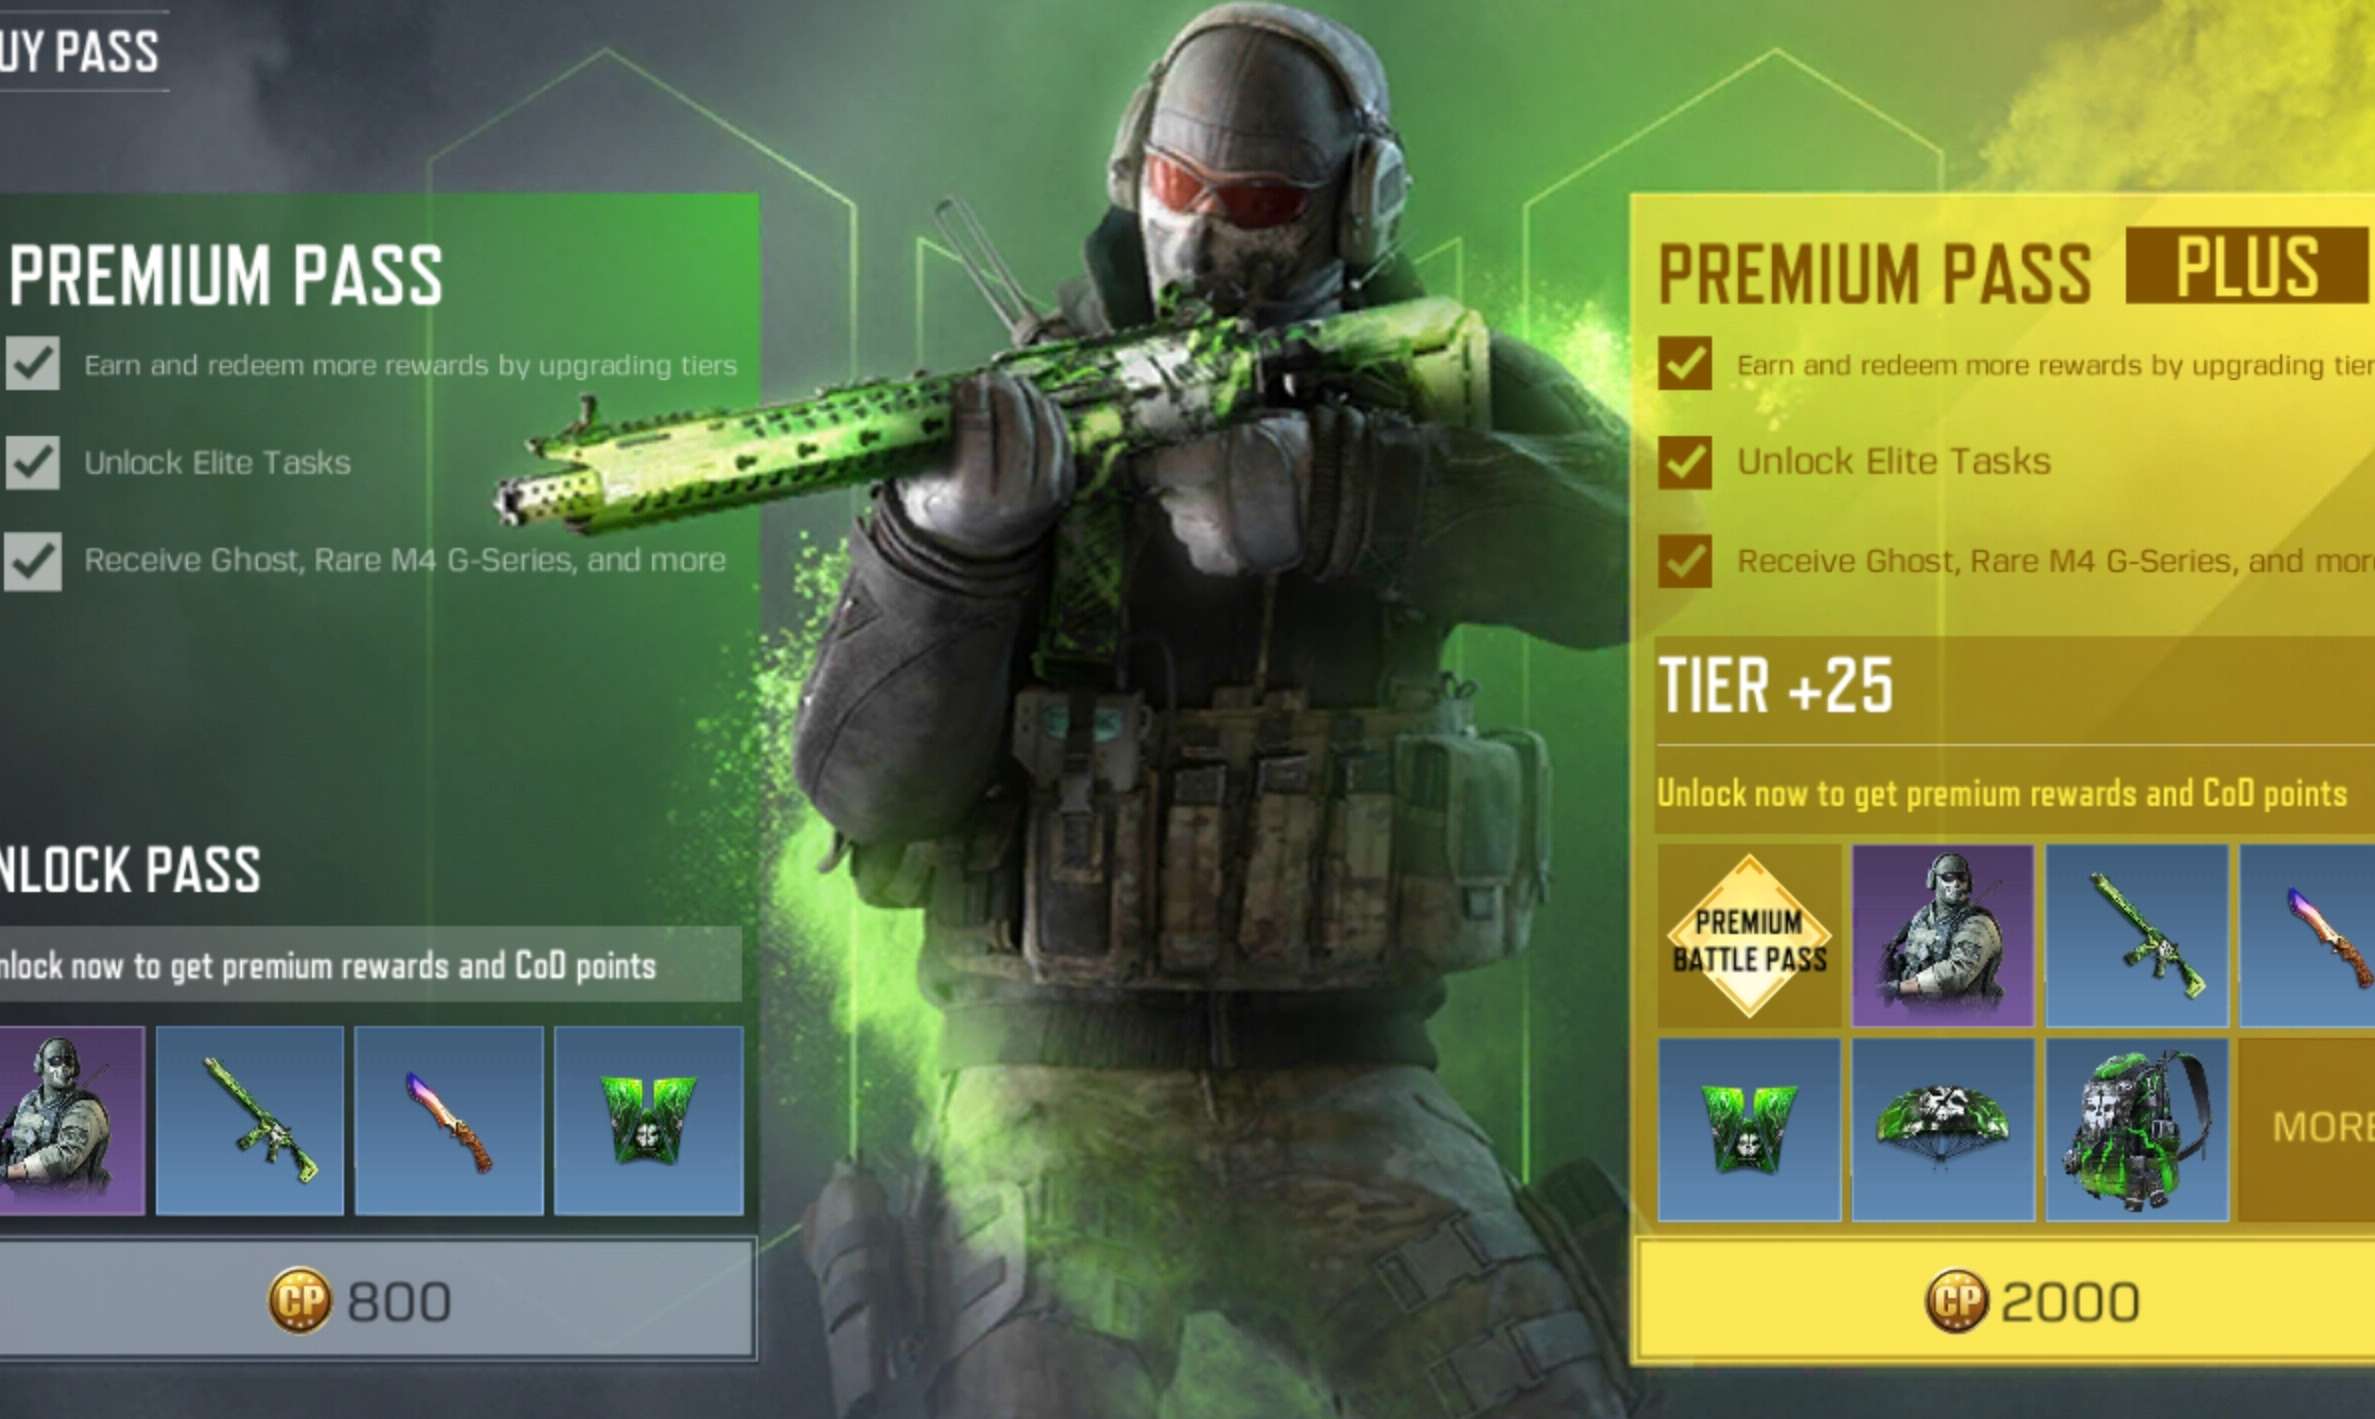 Learn These Tips to Earn CP on Call of Duty Mobile